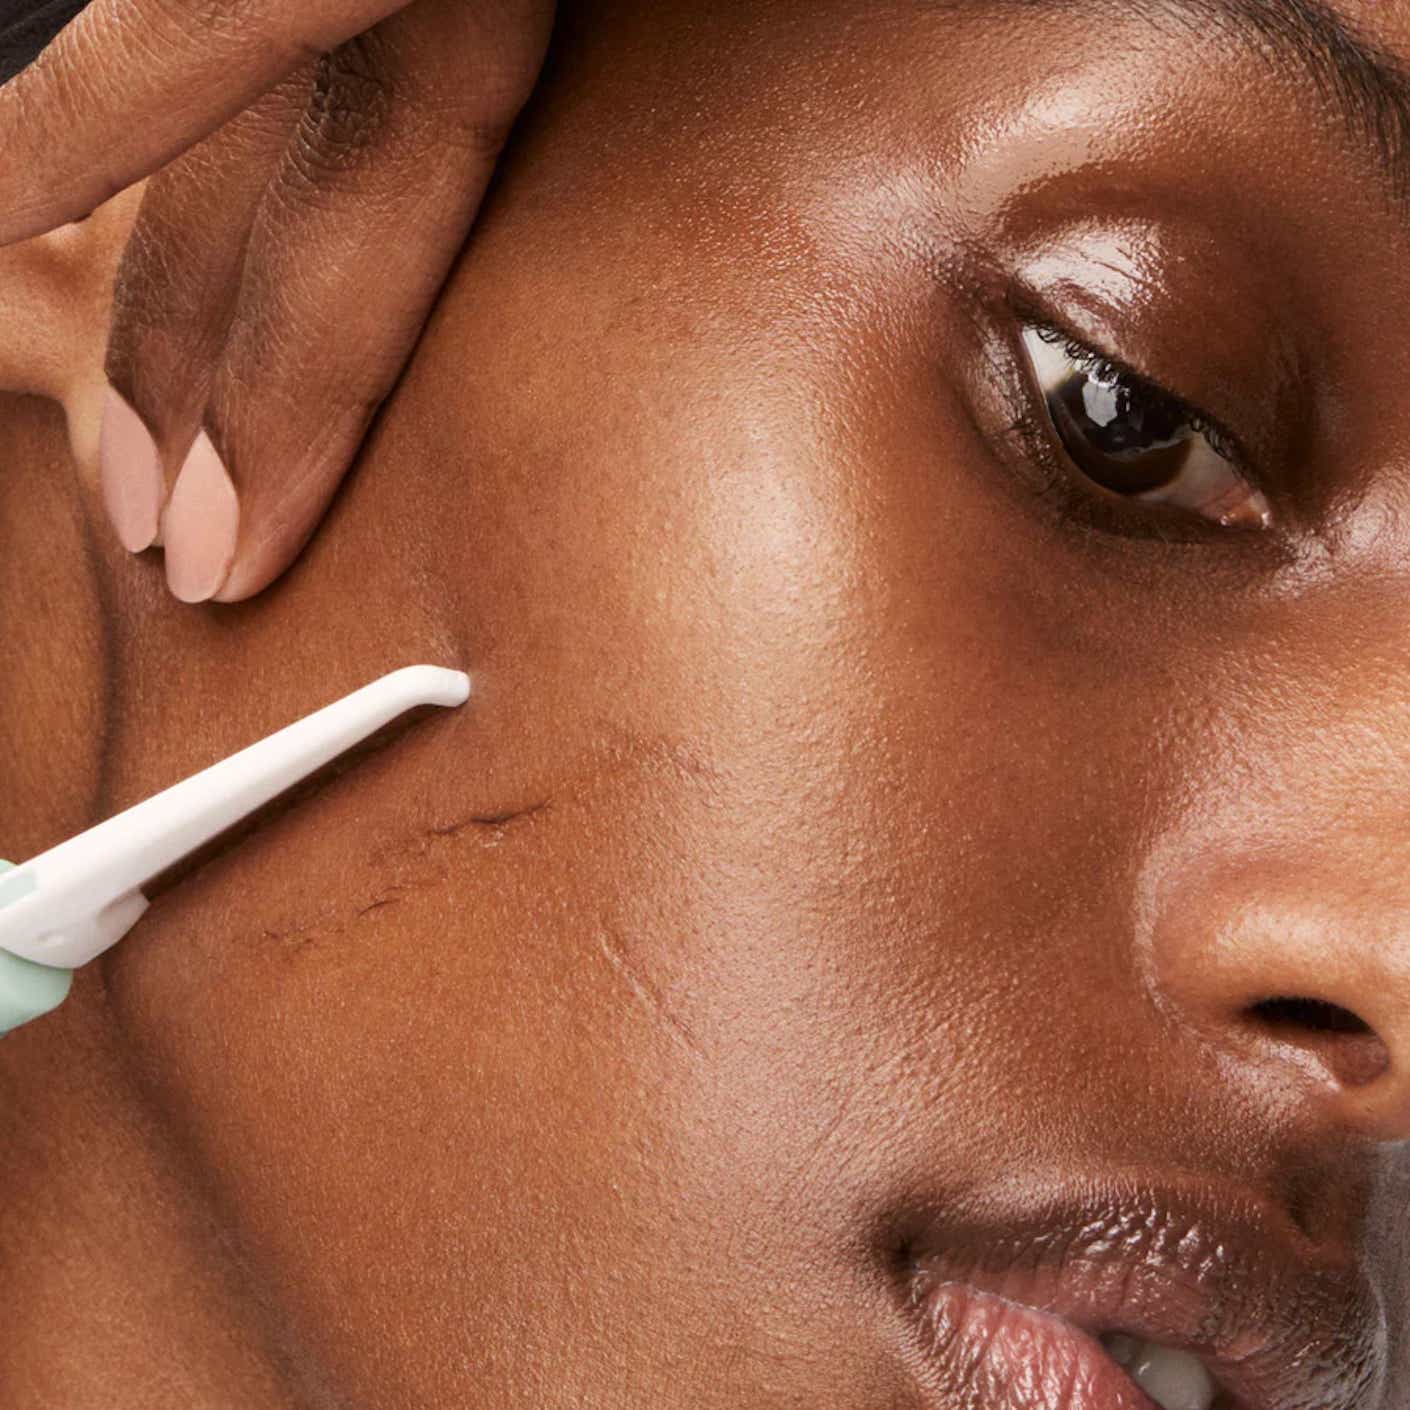 A close up of a woman's face as she uses the dermaplaning razor to shave peach fuzz off of her cheek.